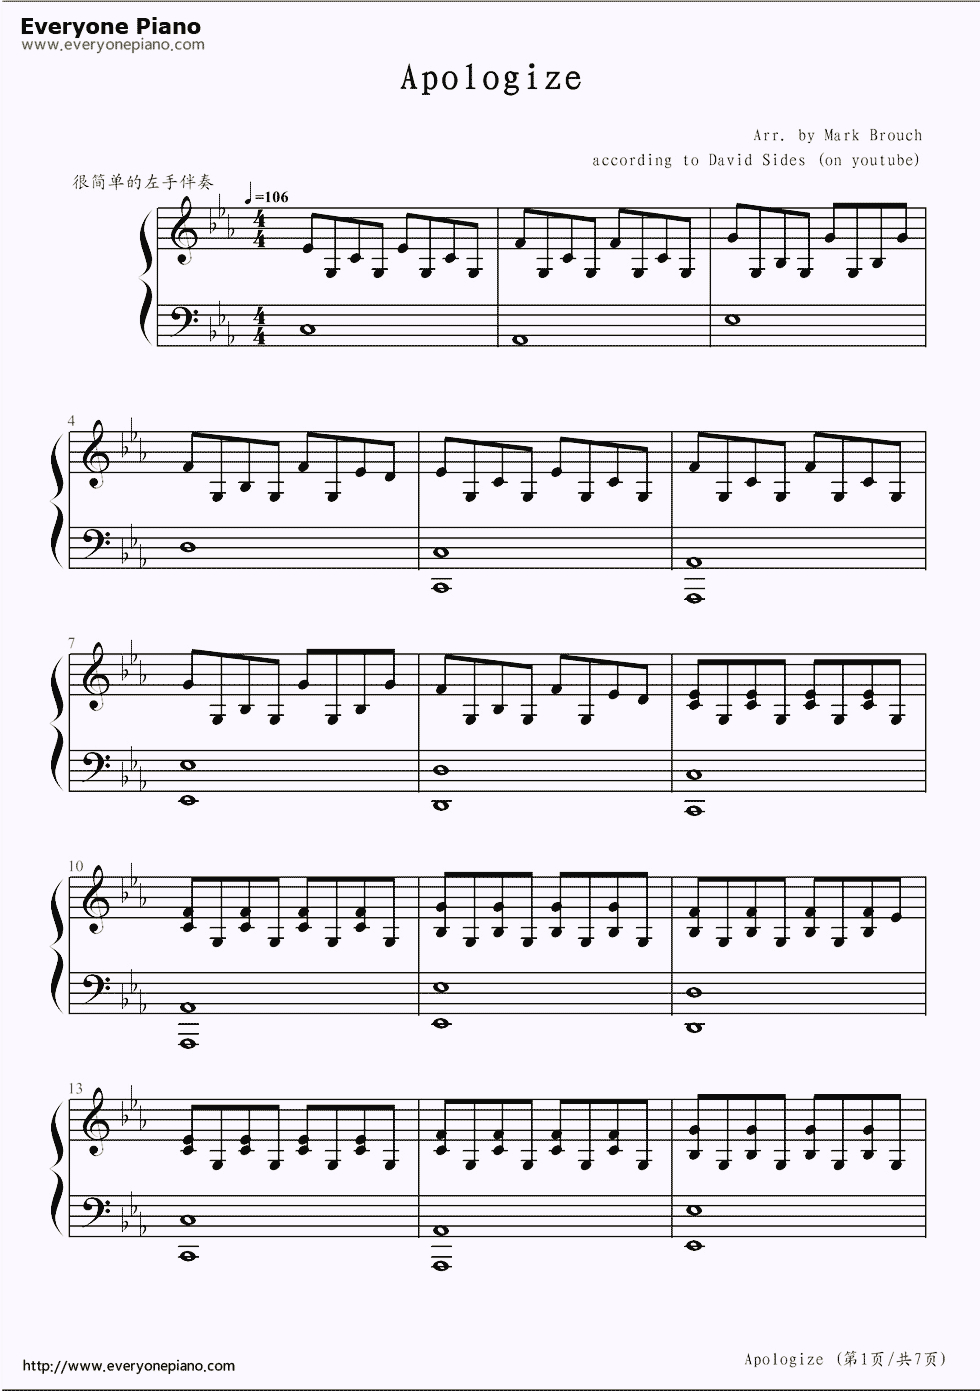 Easy Verson Of Apologizeone Republic | How To Play Piano | Music - Apologize Piano Sheet Music Free Printable